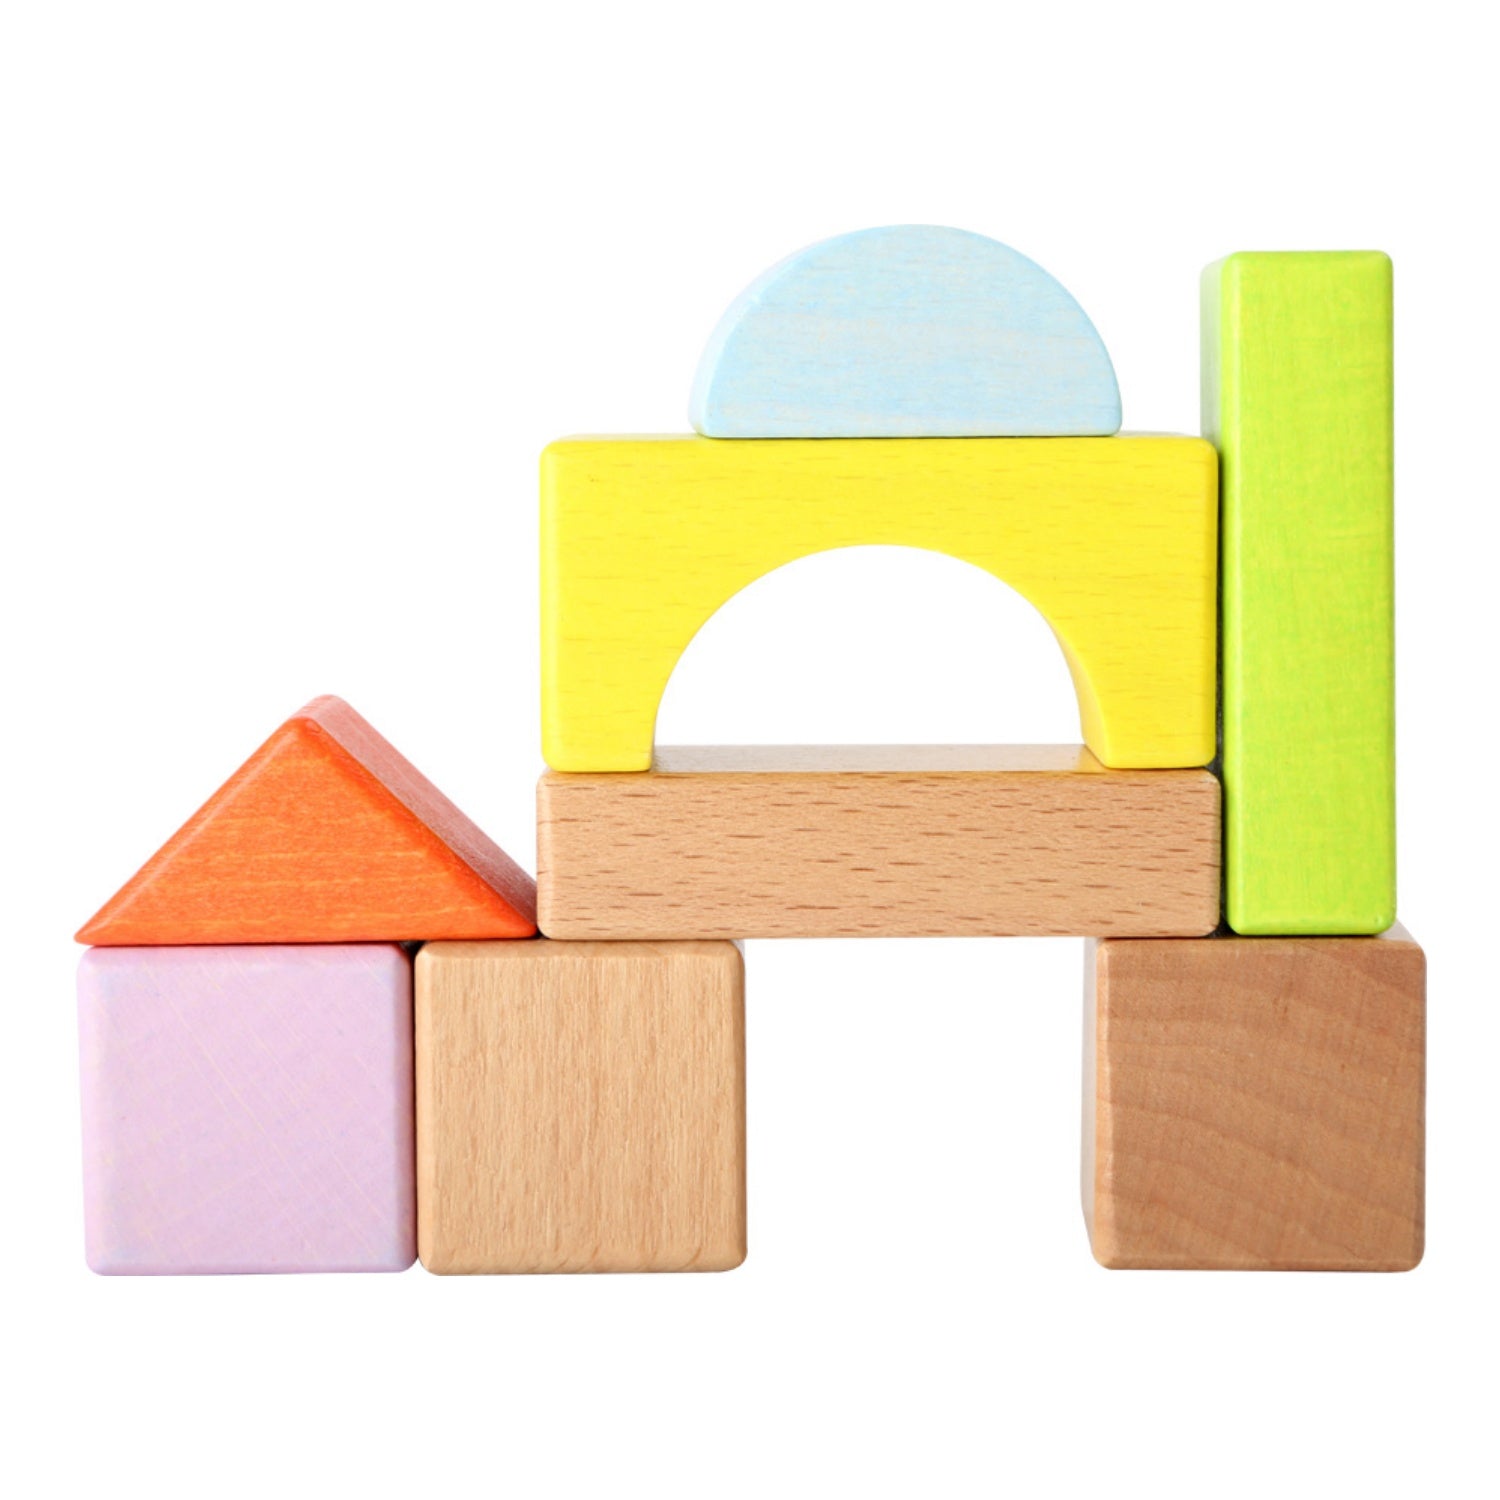 Small Foot Coloured Wooden Building Blocks | Closeup Wooden Blocks | Toddler Activity Toy | BeoVERDE Ireland